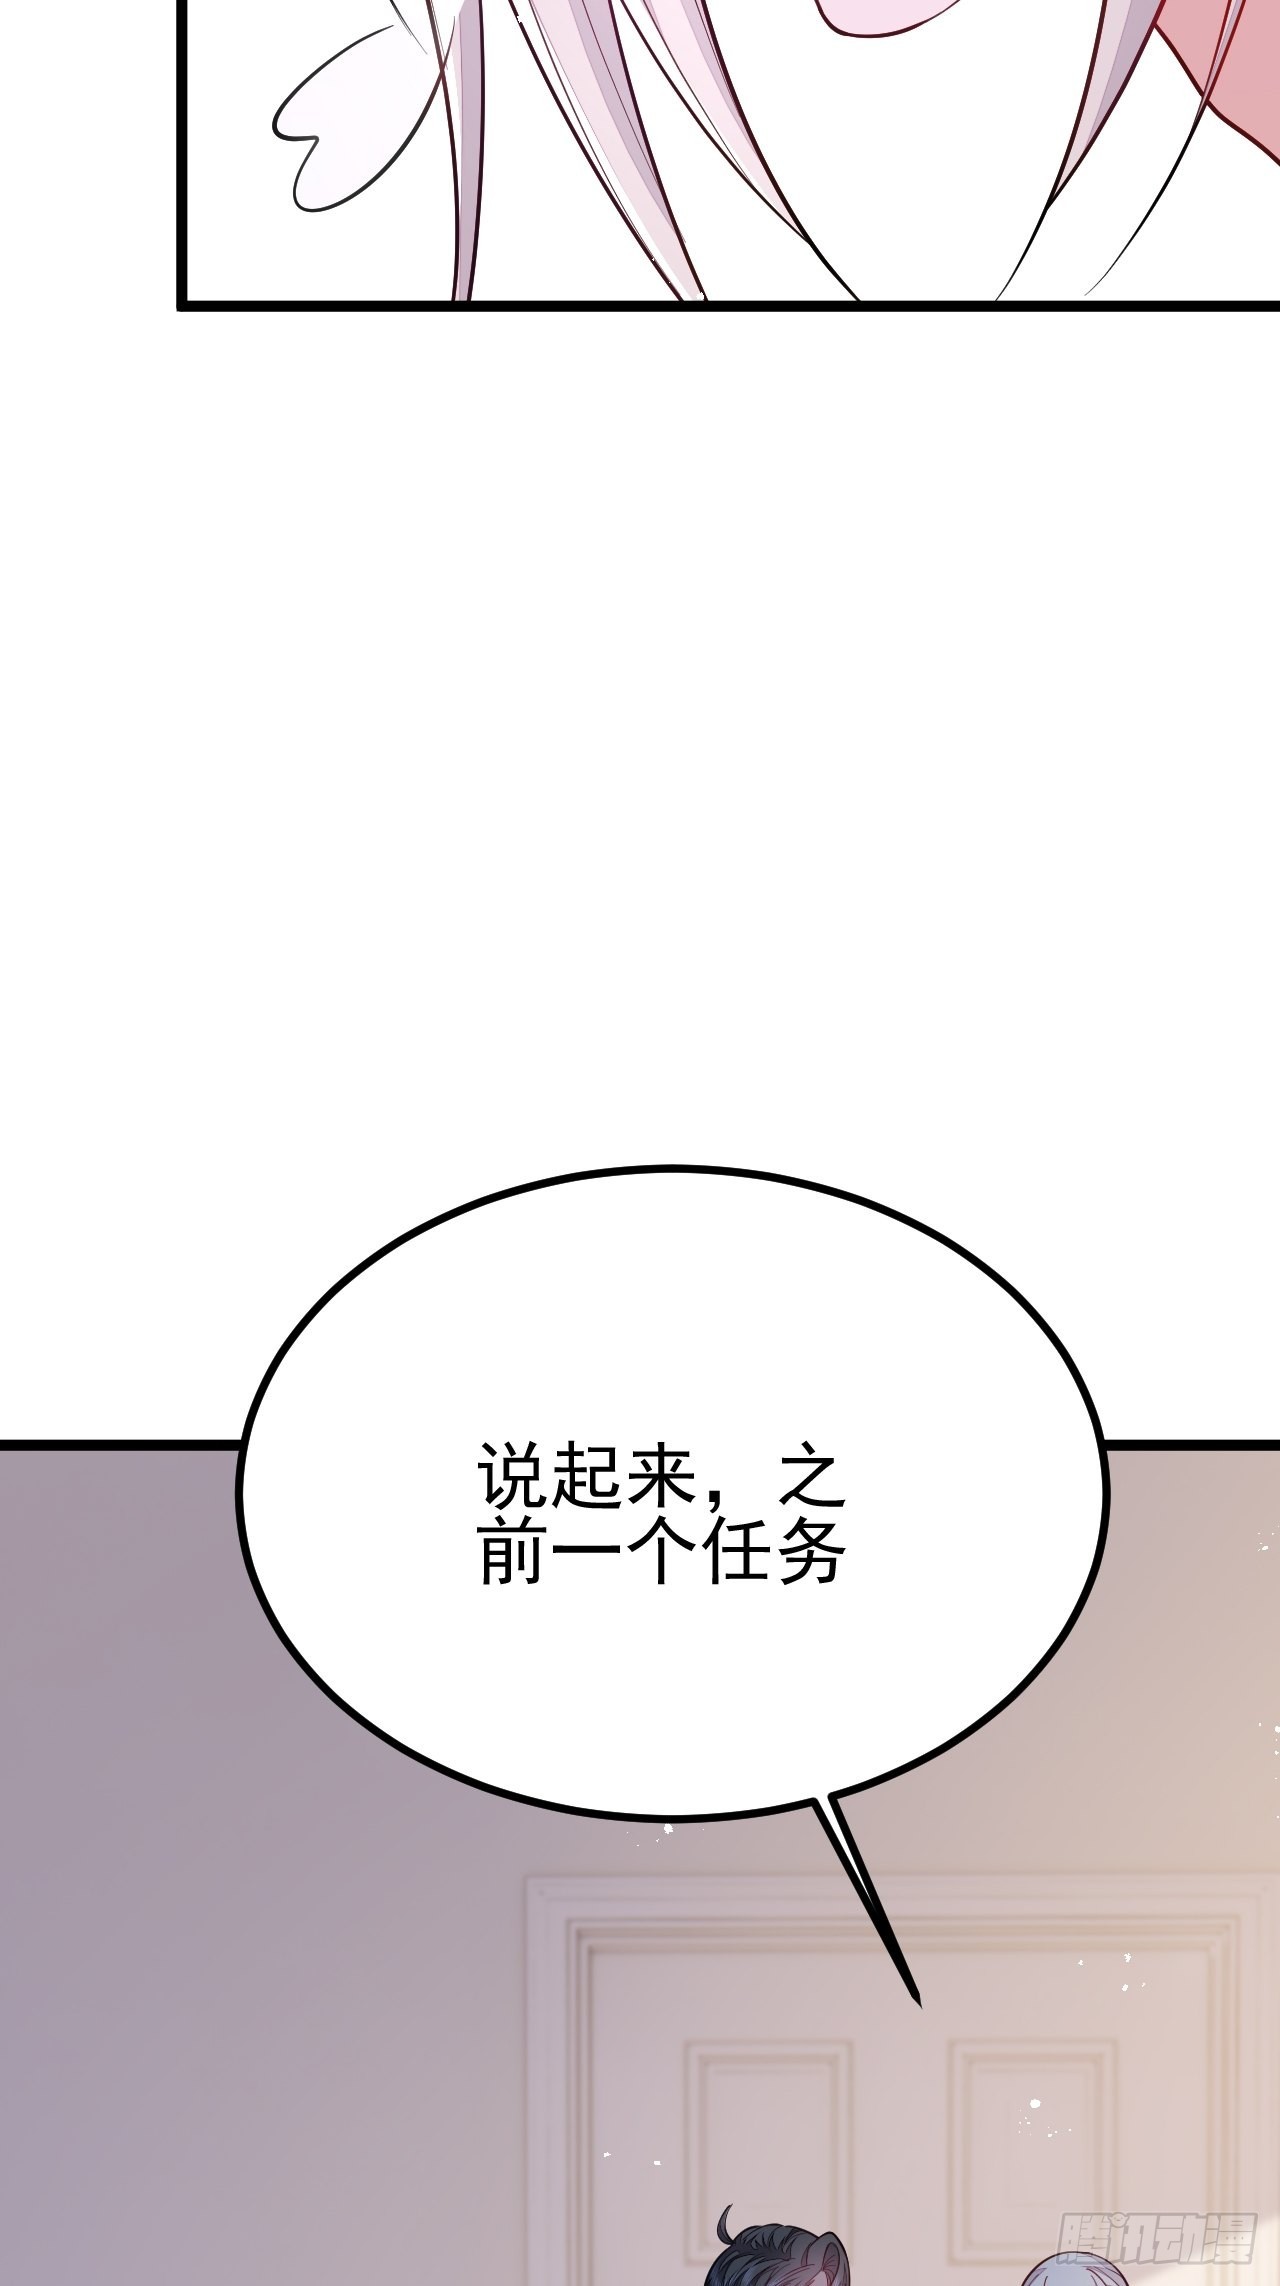 無常4843號 - 第56話(1/2) - 2